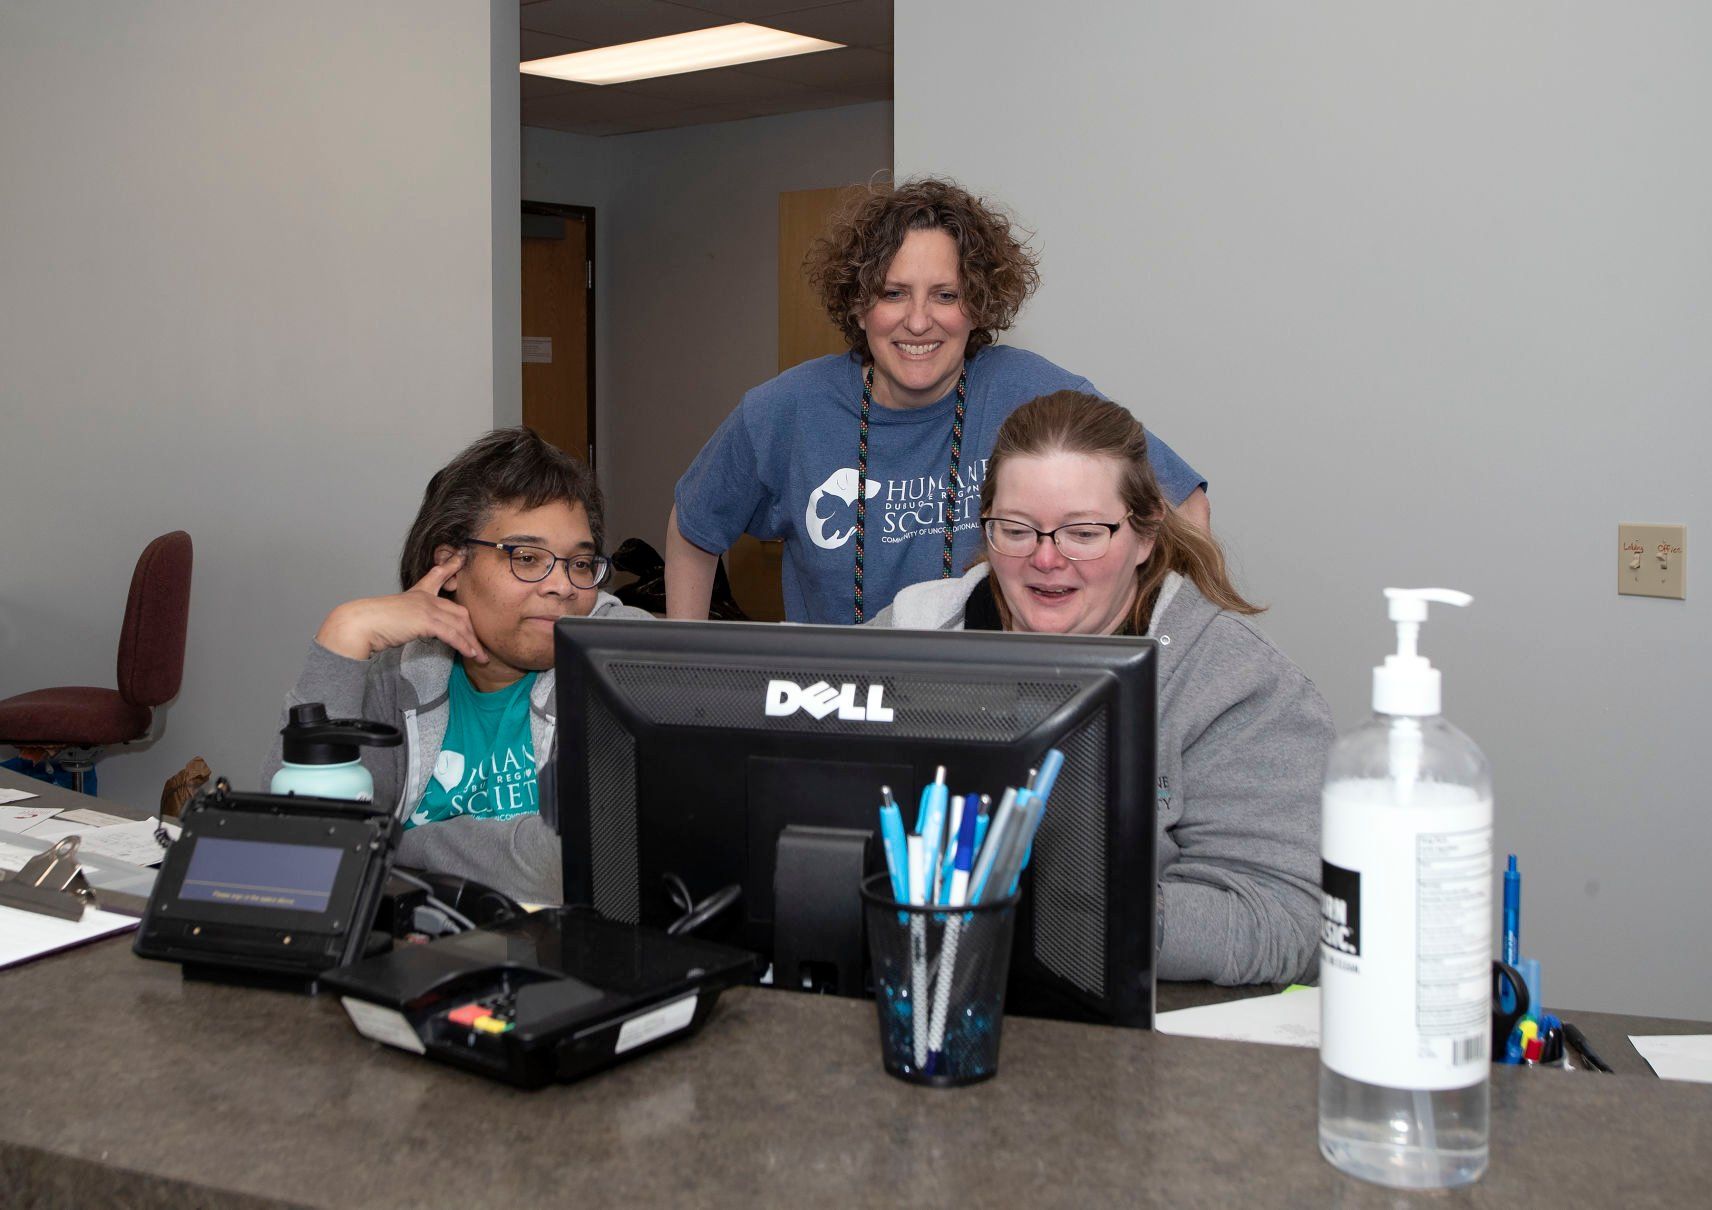 Executive Director, Noelle Chesney (center) works with Roberta Milligan (left) and Becca Cunningham at Dubuque Regional Humane Society in Dubuque on Wednesday, June 8, 2022.    PHOTO CREDIT: Stephen Gassman